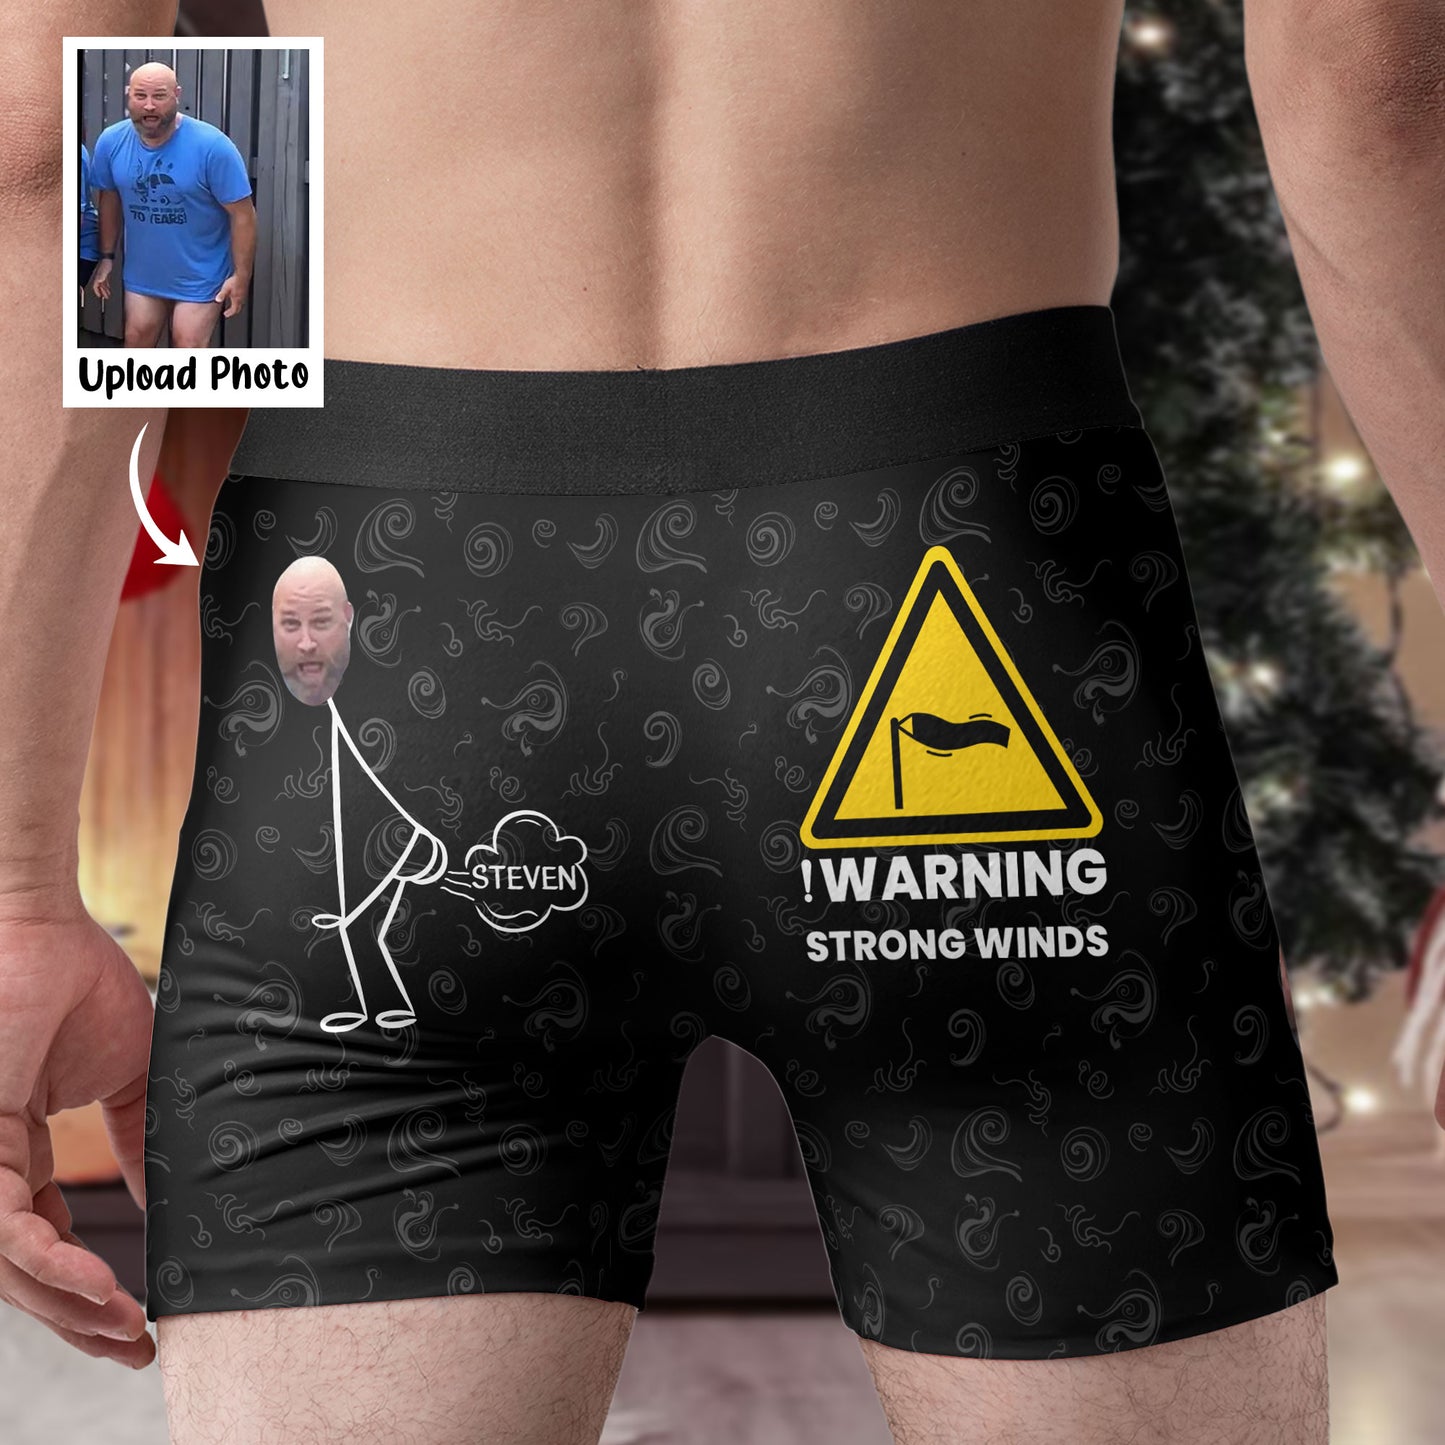 Warning Strong Winds - Personalized Photo Men's Boxer Brief